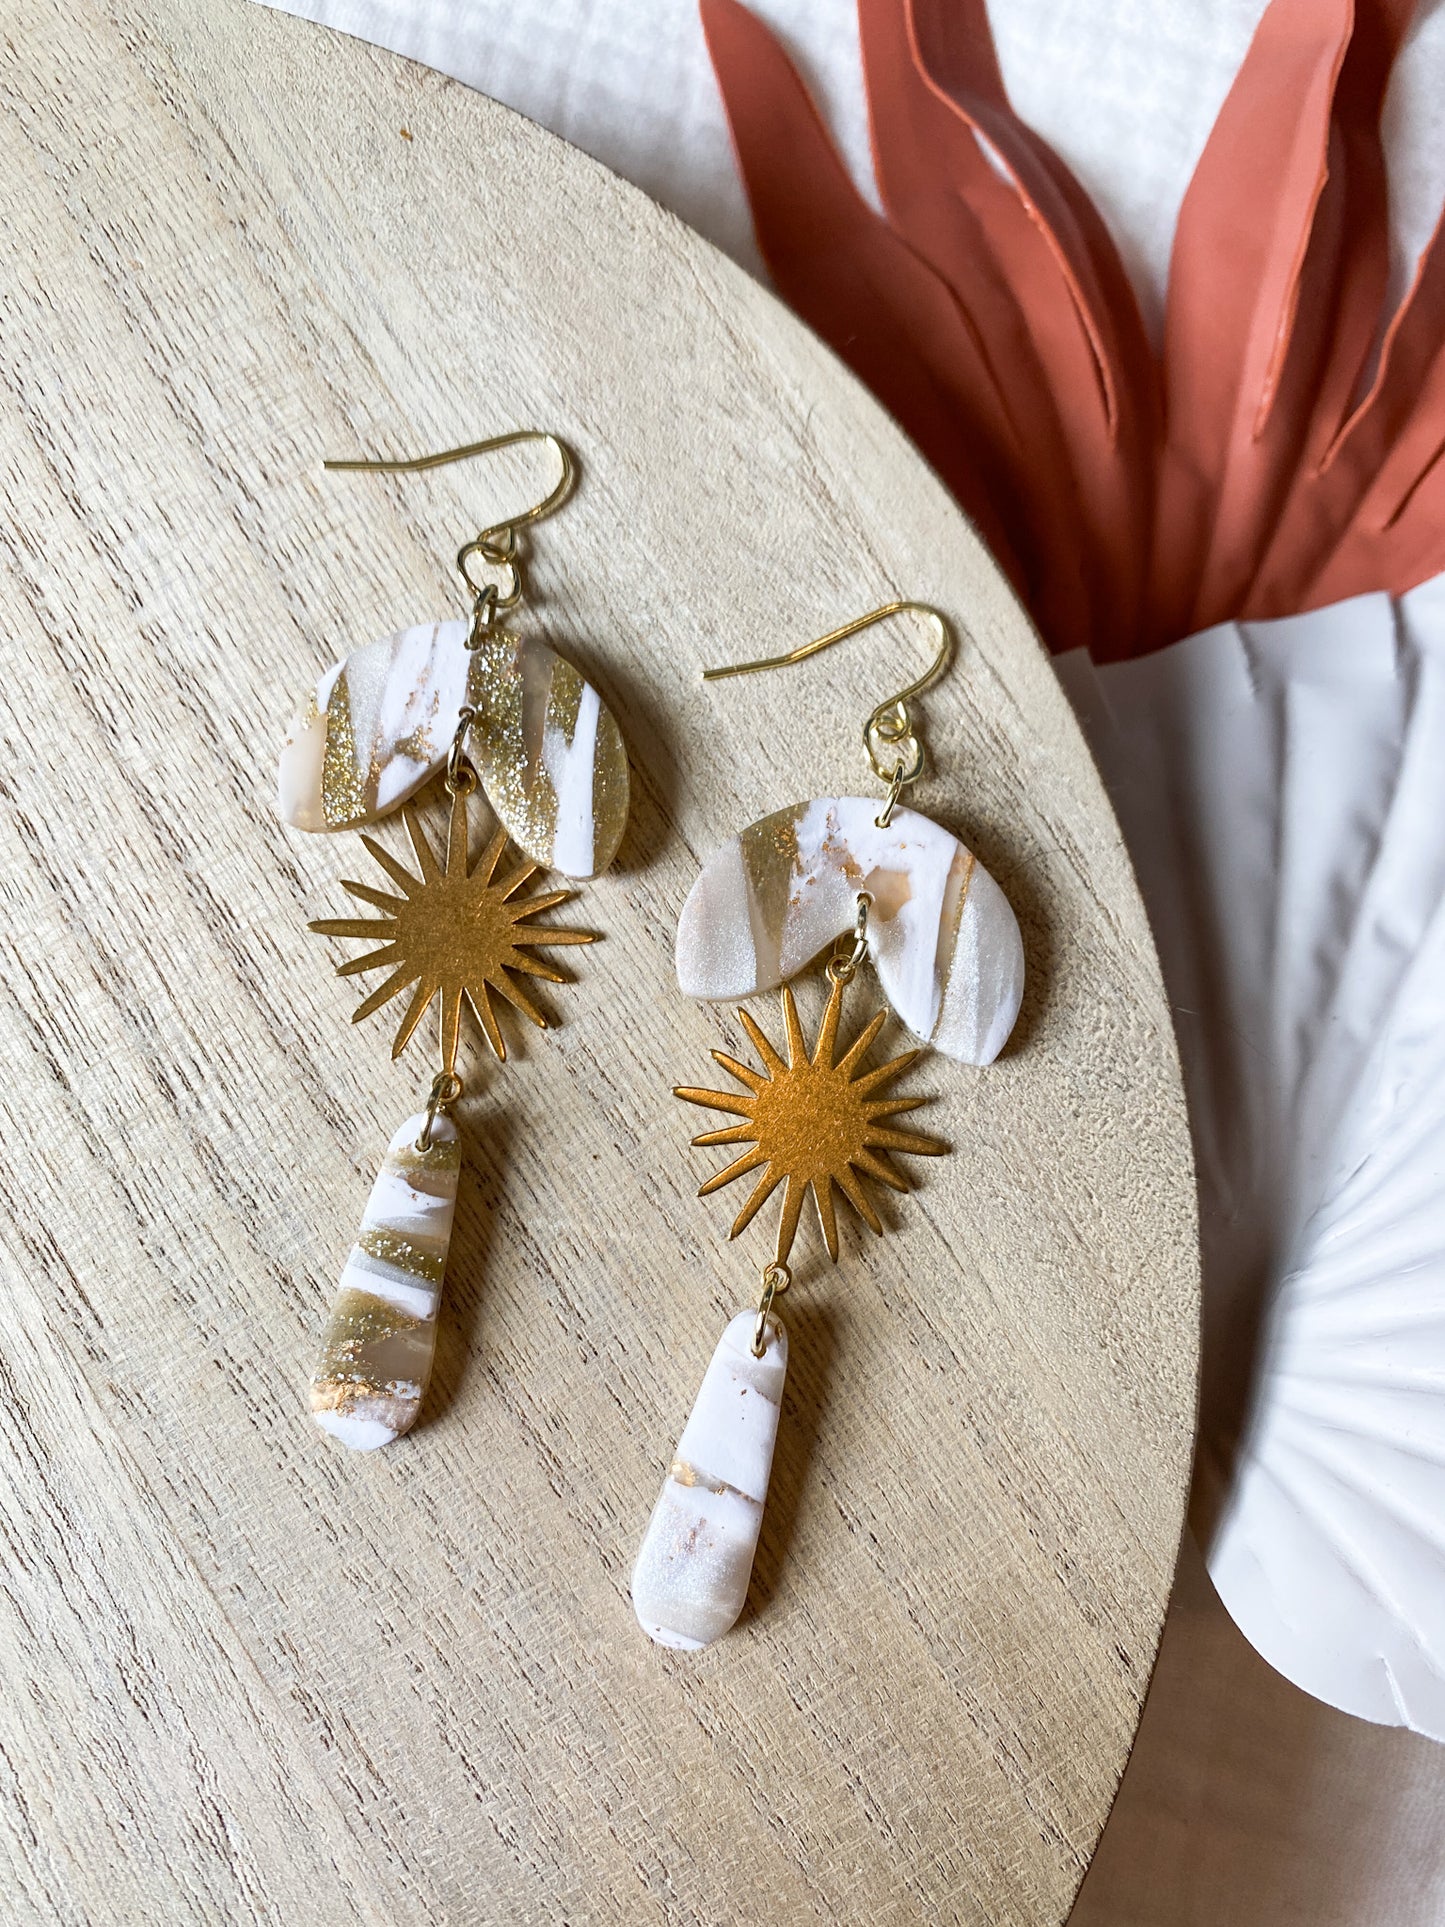 Witchy Marble Clay Earrings | Celestial Vibes | Statement Earrings | Lightweight